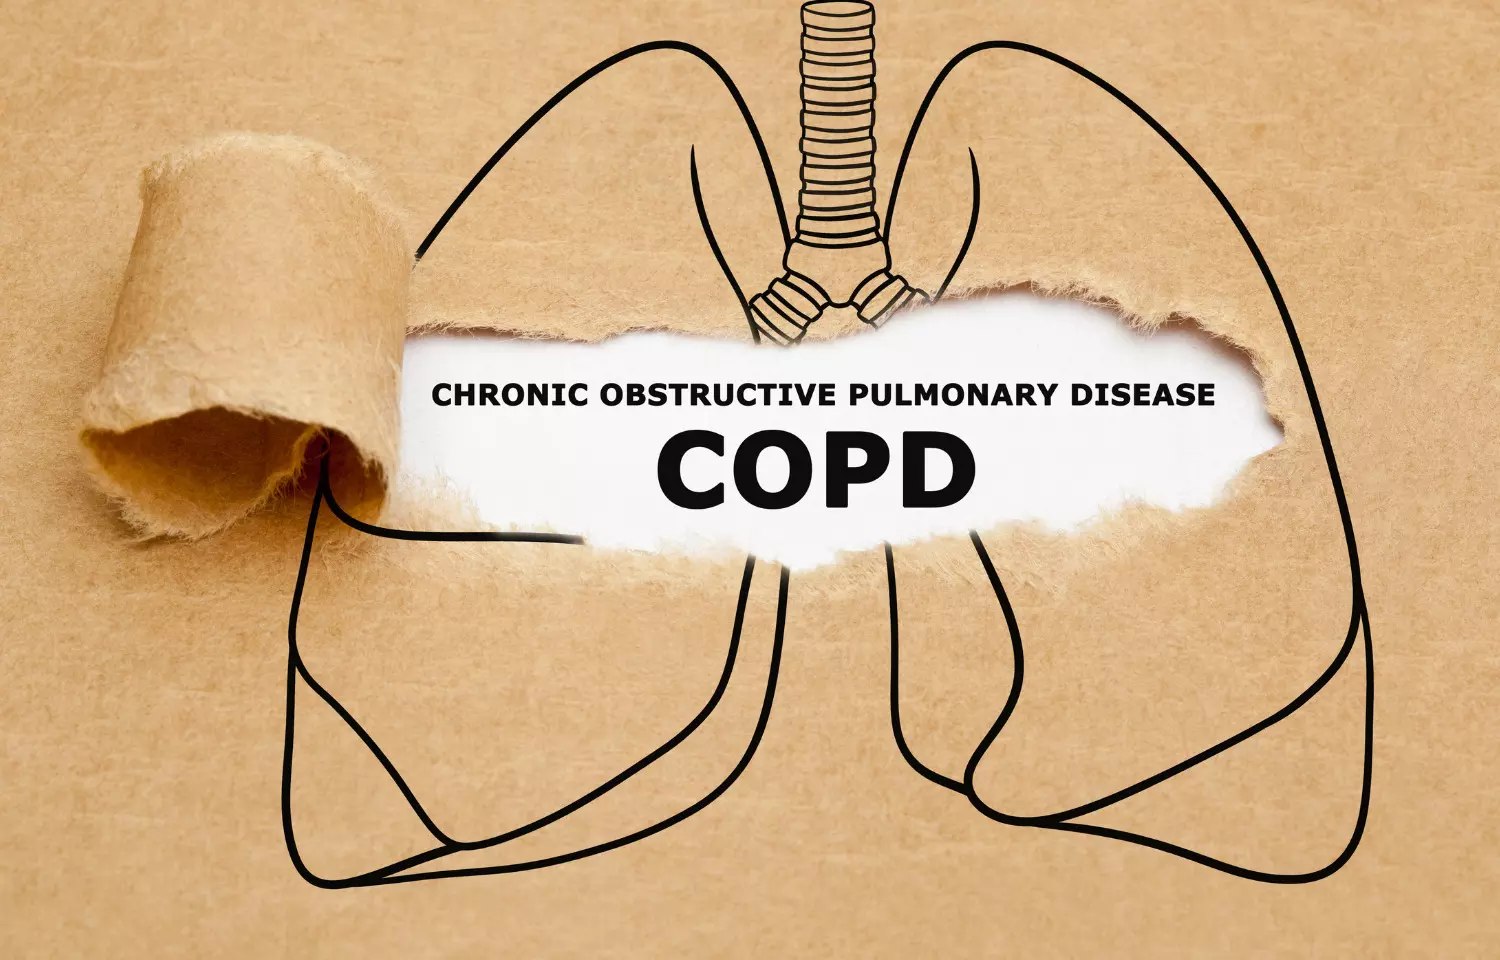 COPD causes premature aging of the immune system, study suggests